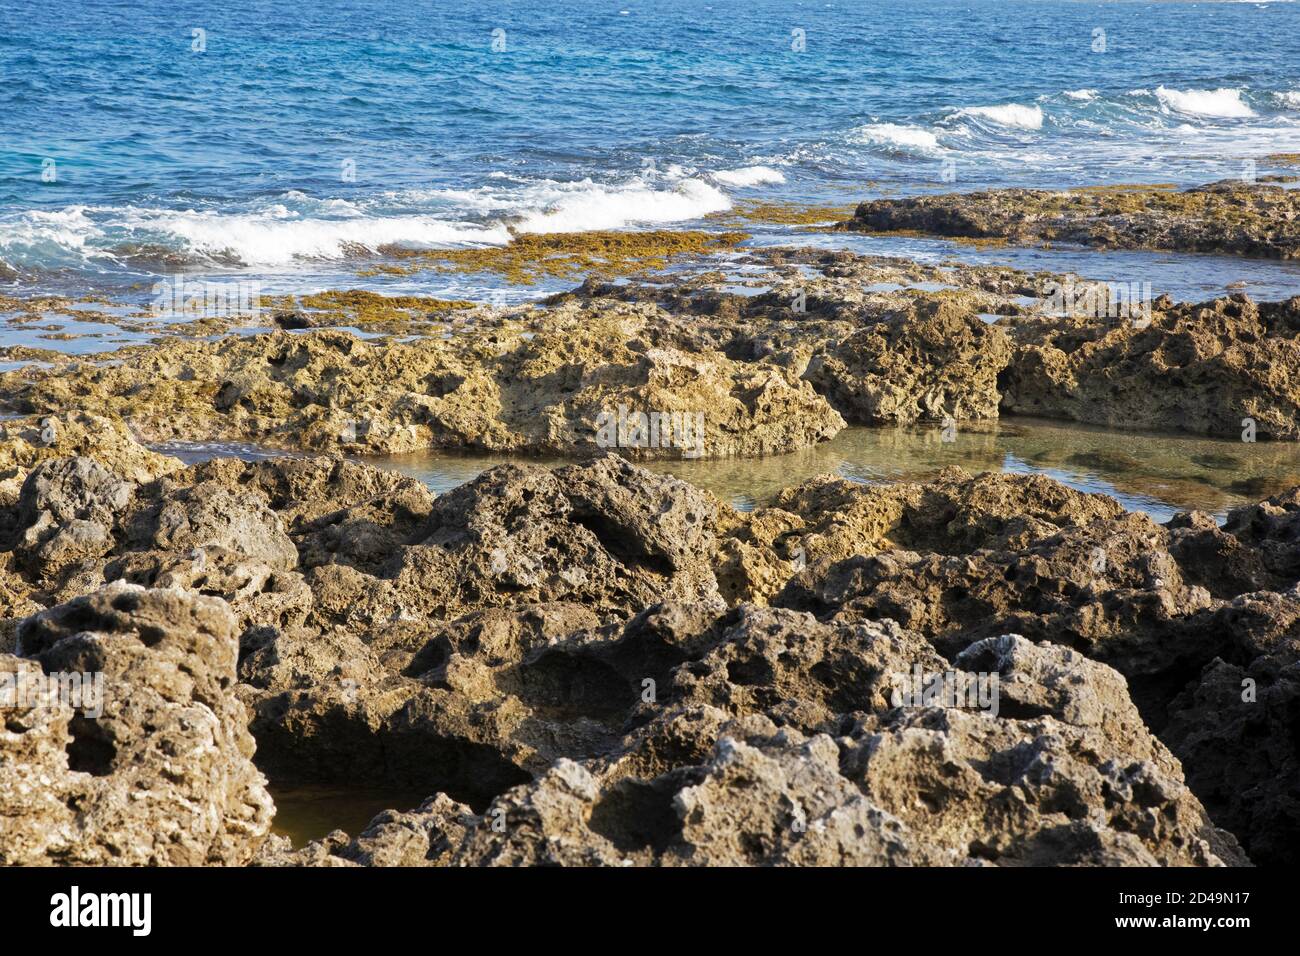 Unnamed beach of volcanic or Igneous rock on the coast of Taiwan, China Stock Photo